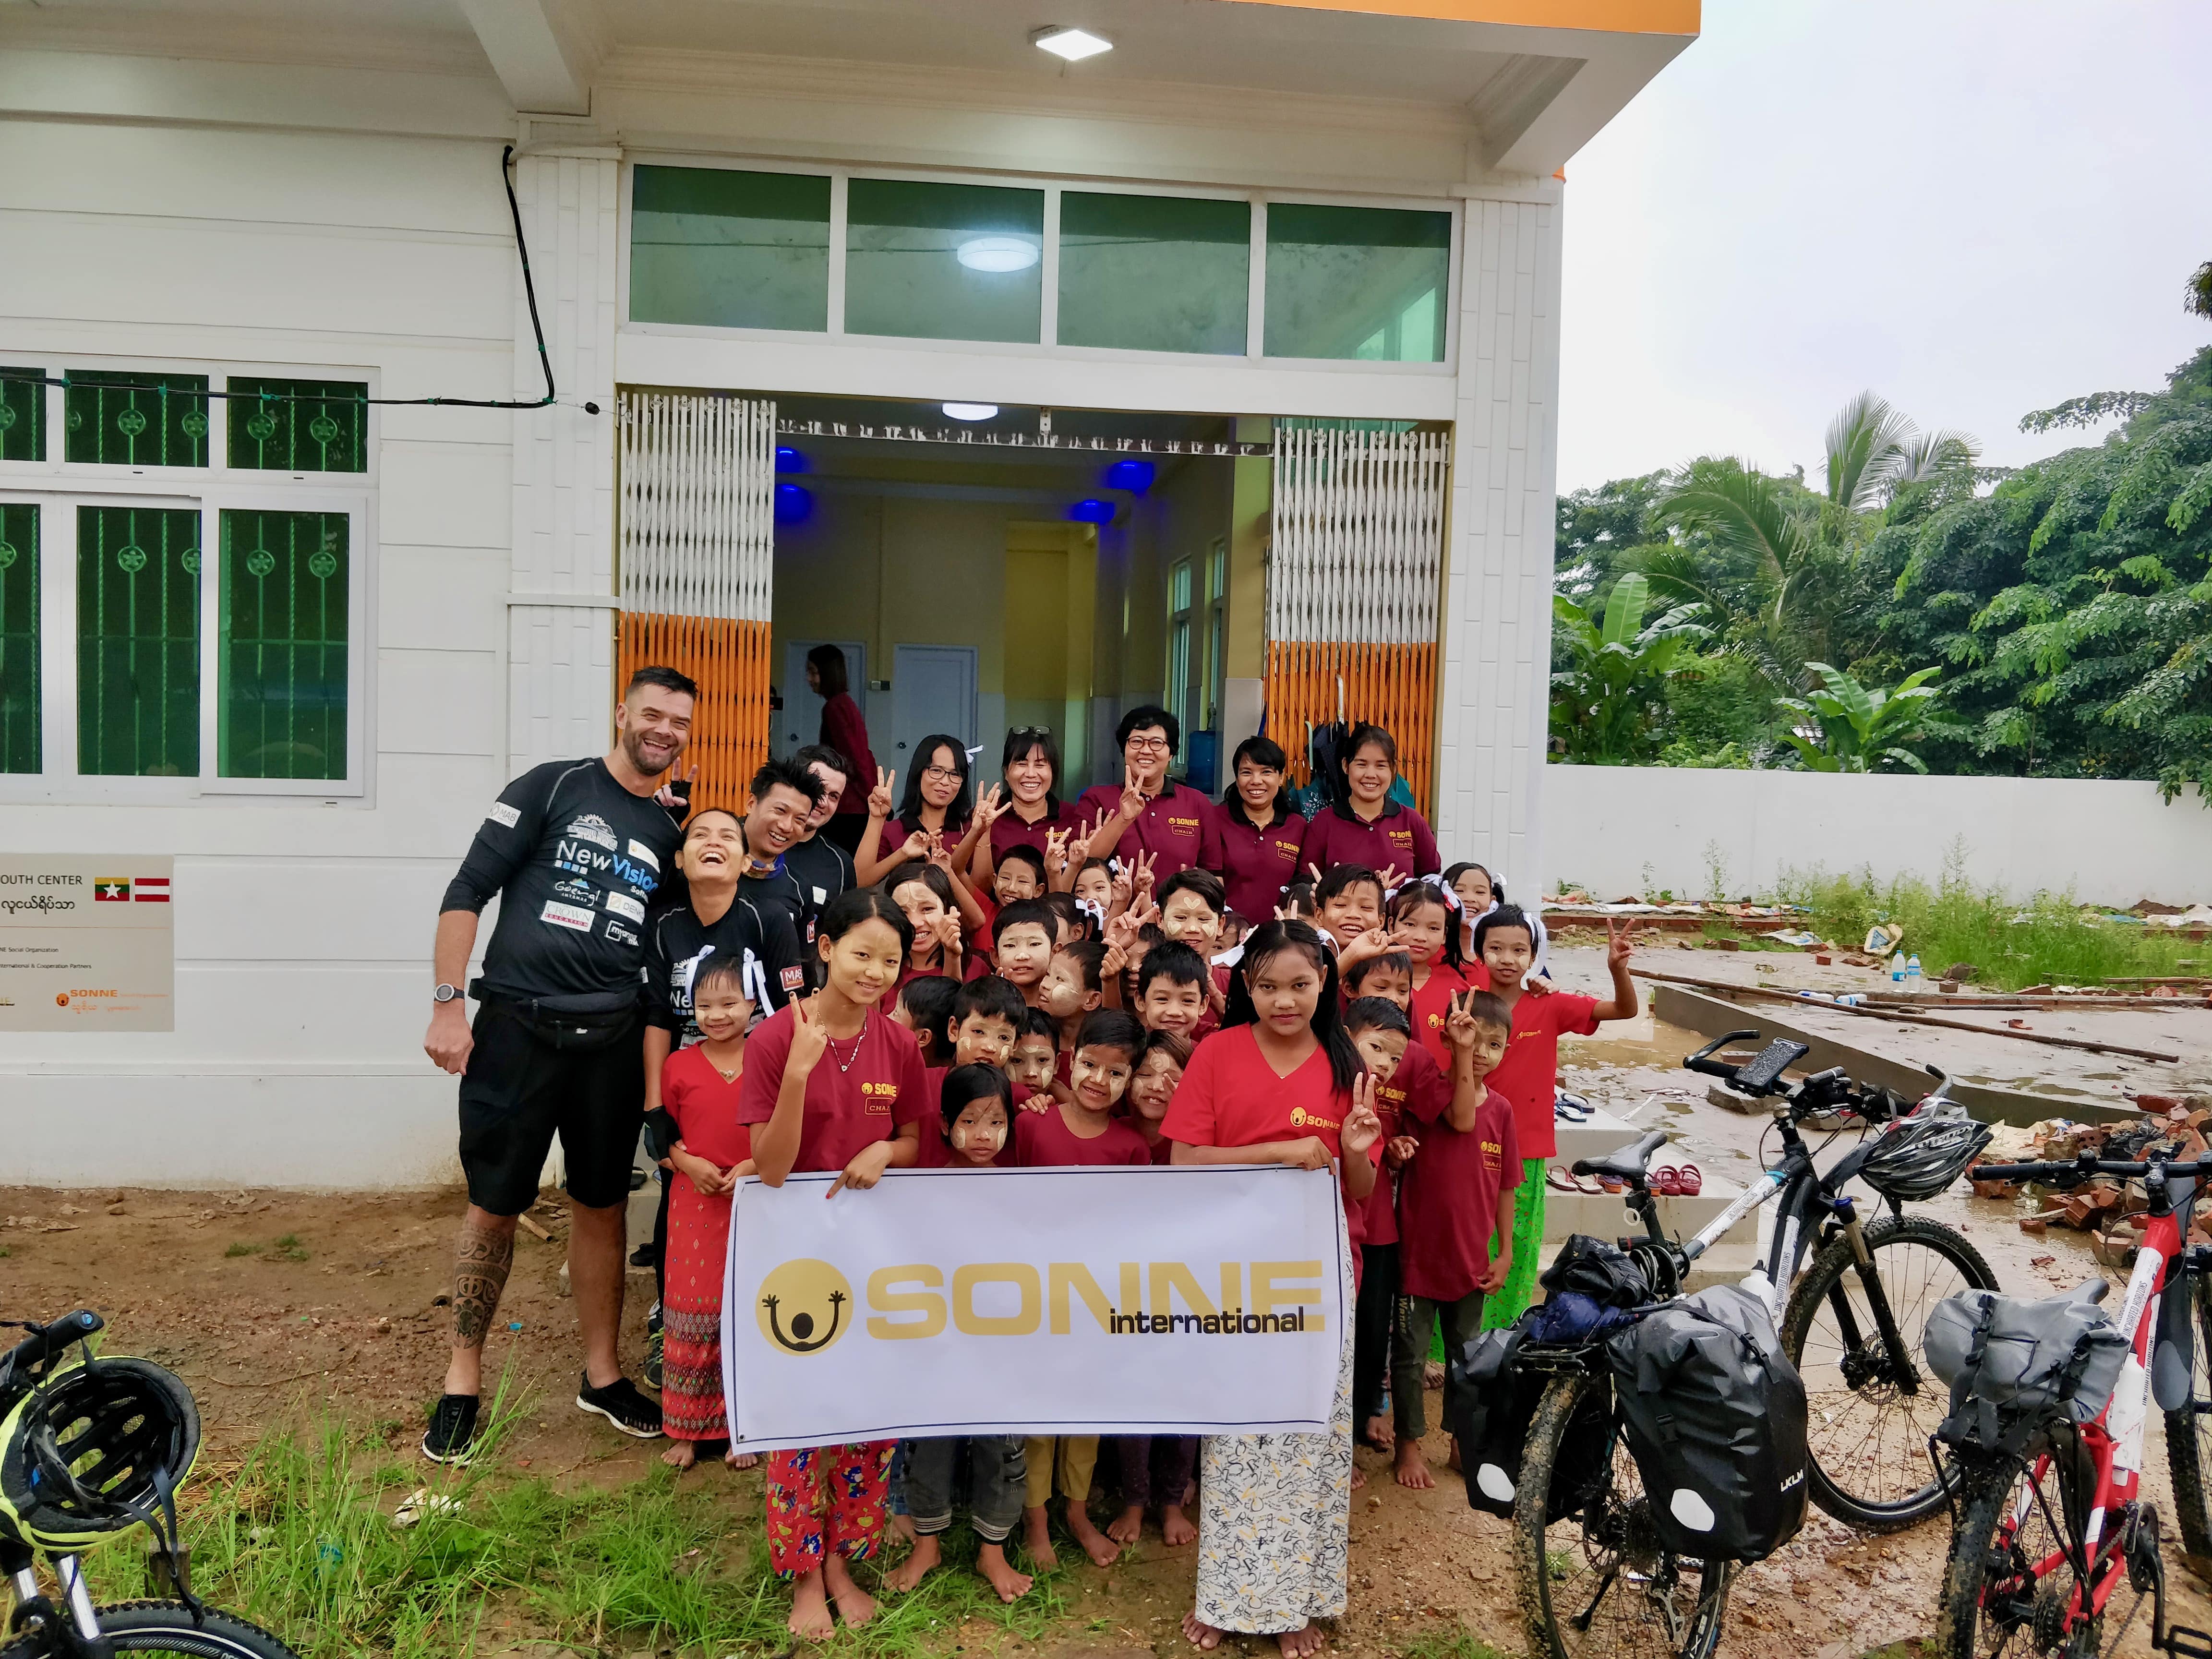 The adventurers begin their cycle to Singapore from the new SONNE International children's centre in Yangon. (Myanmar Mix)